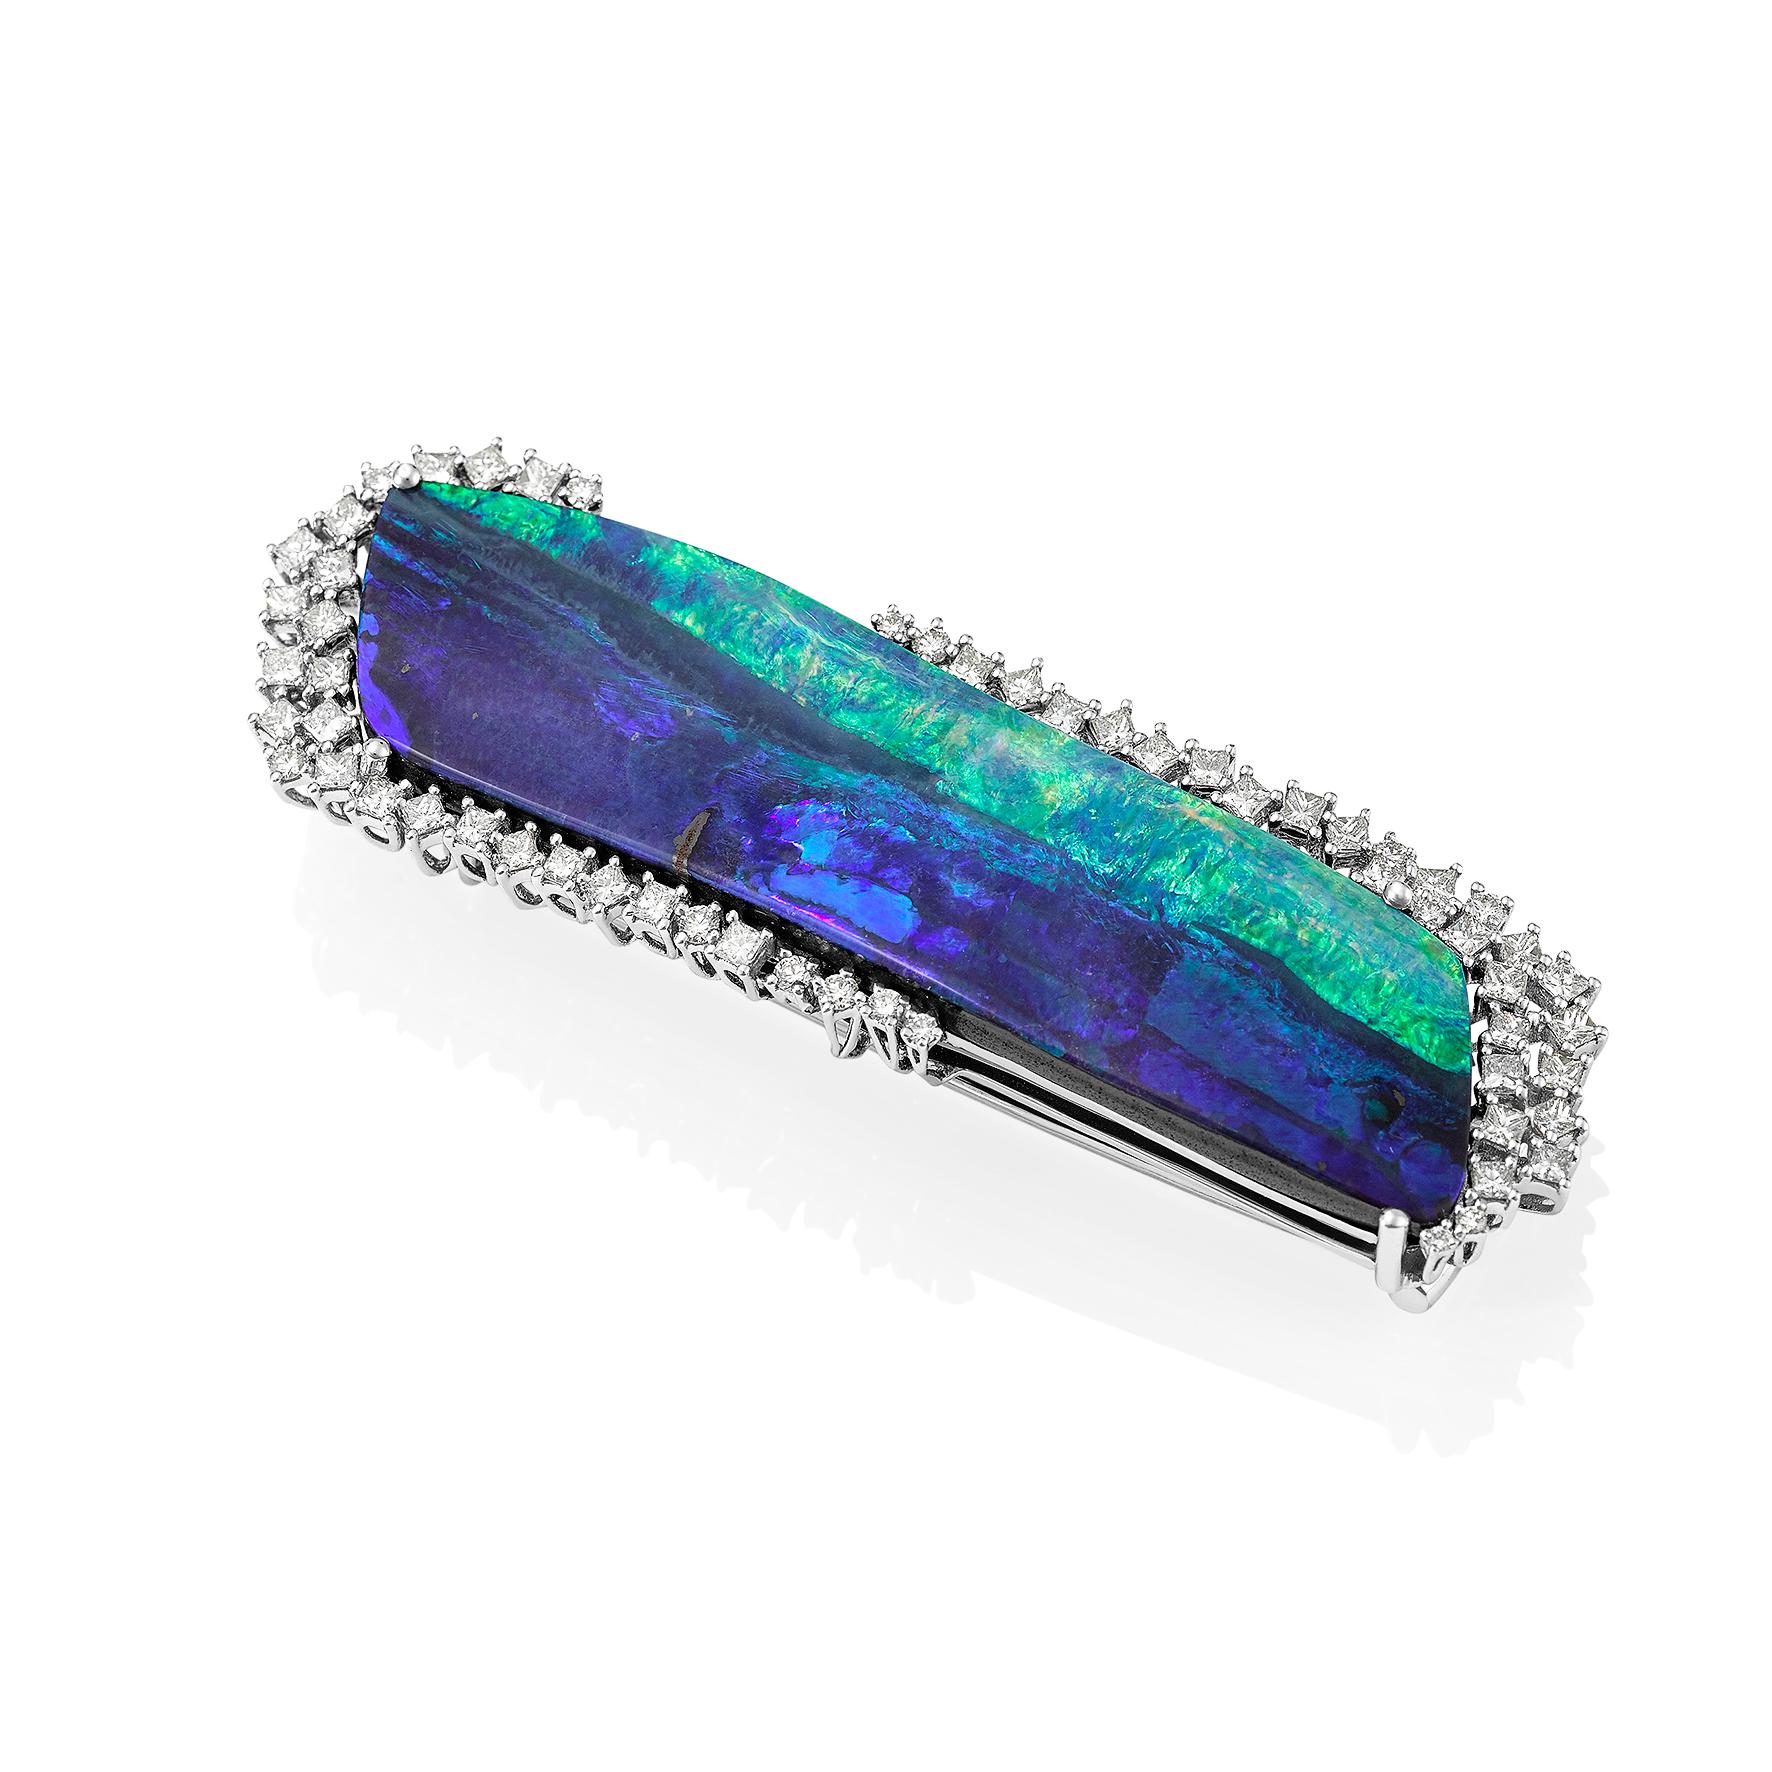 Giulians contemporary handcrafted 18 karat 56.44ct Australian Boulder opal and diamond brooch.  The natural solid Boulder opal, from Queensland Australia, displays bright blue-green play-of-colour and weights 56.44ct.  The opal is surrounded by a